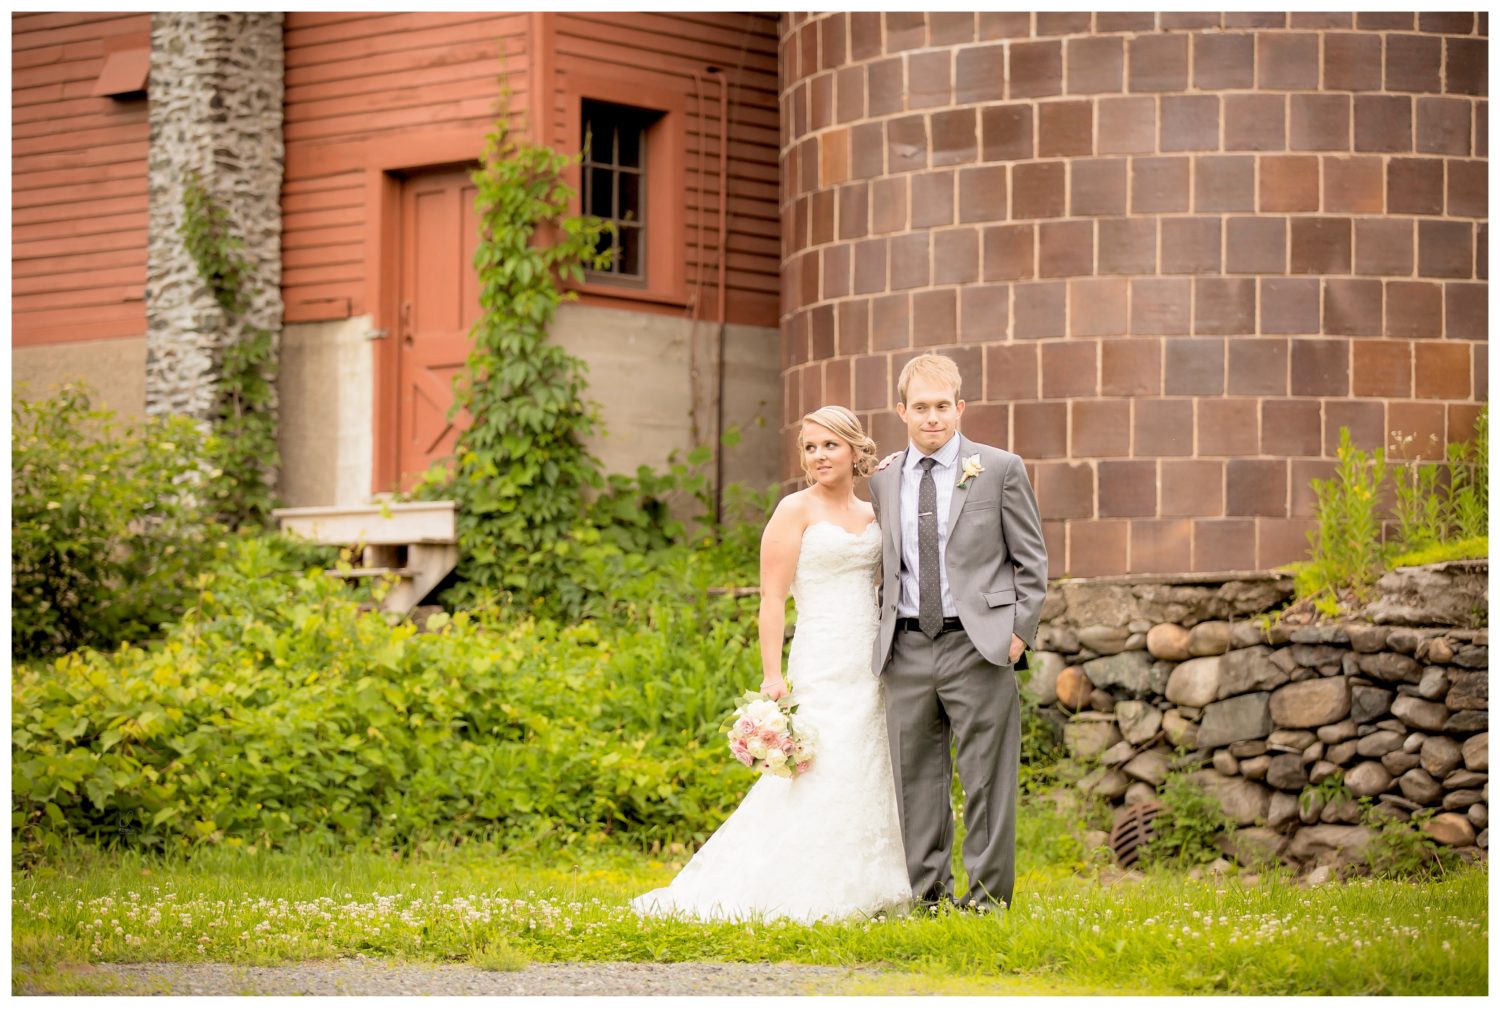 Bride and Groom in front of Silo at QuonQuont Farm in Whately MA. Rustic New England Wedding 